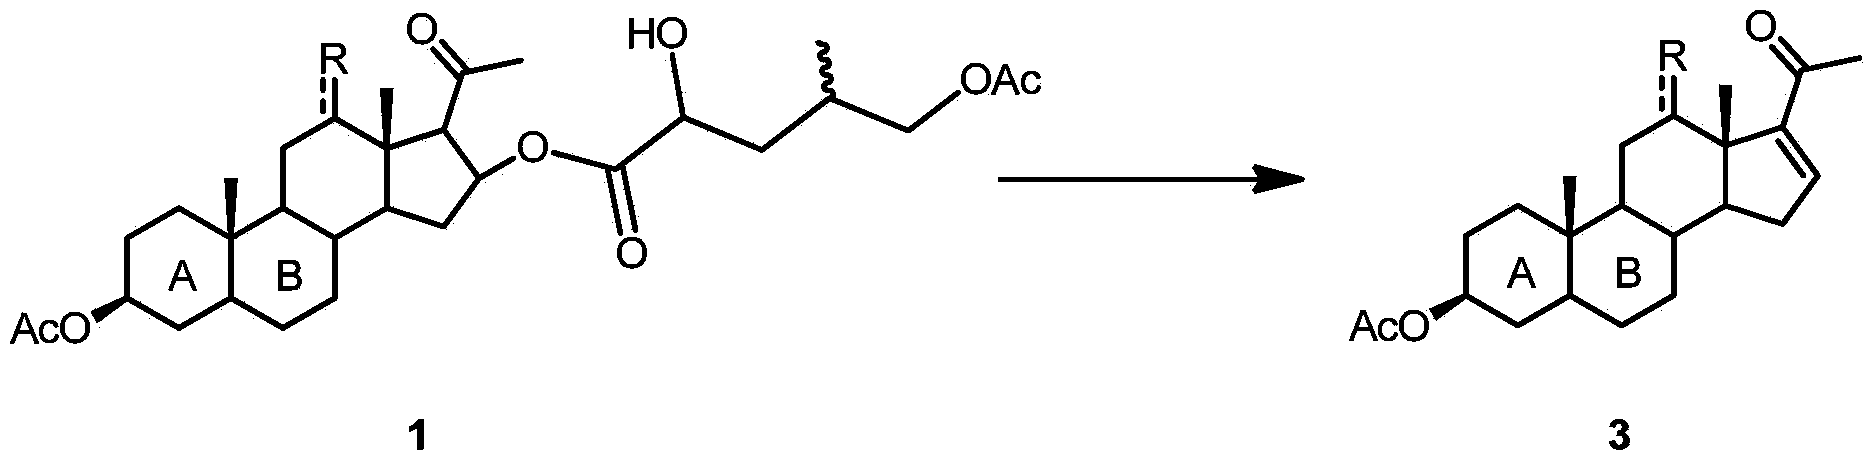 16-(2'-hydroxyl-4'-methyl-5'-acetoxyl) amyl acyloxy acetic acid progesterone alcohol compound as well as synthetic method and application thereof